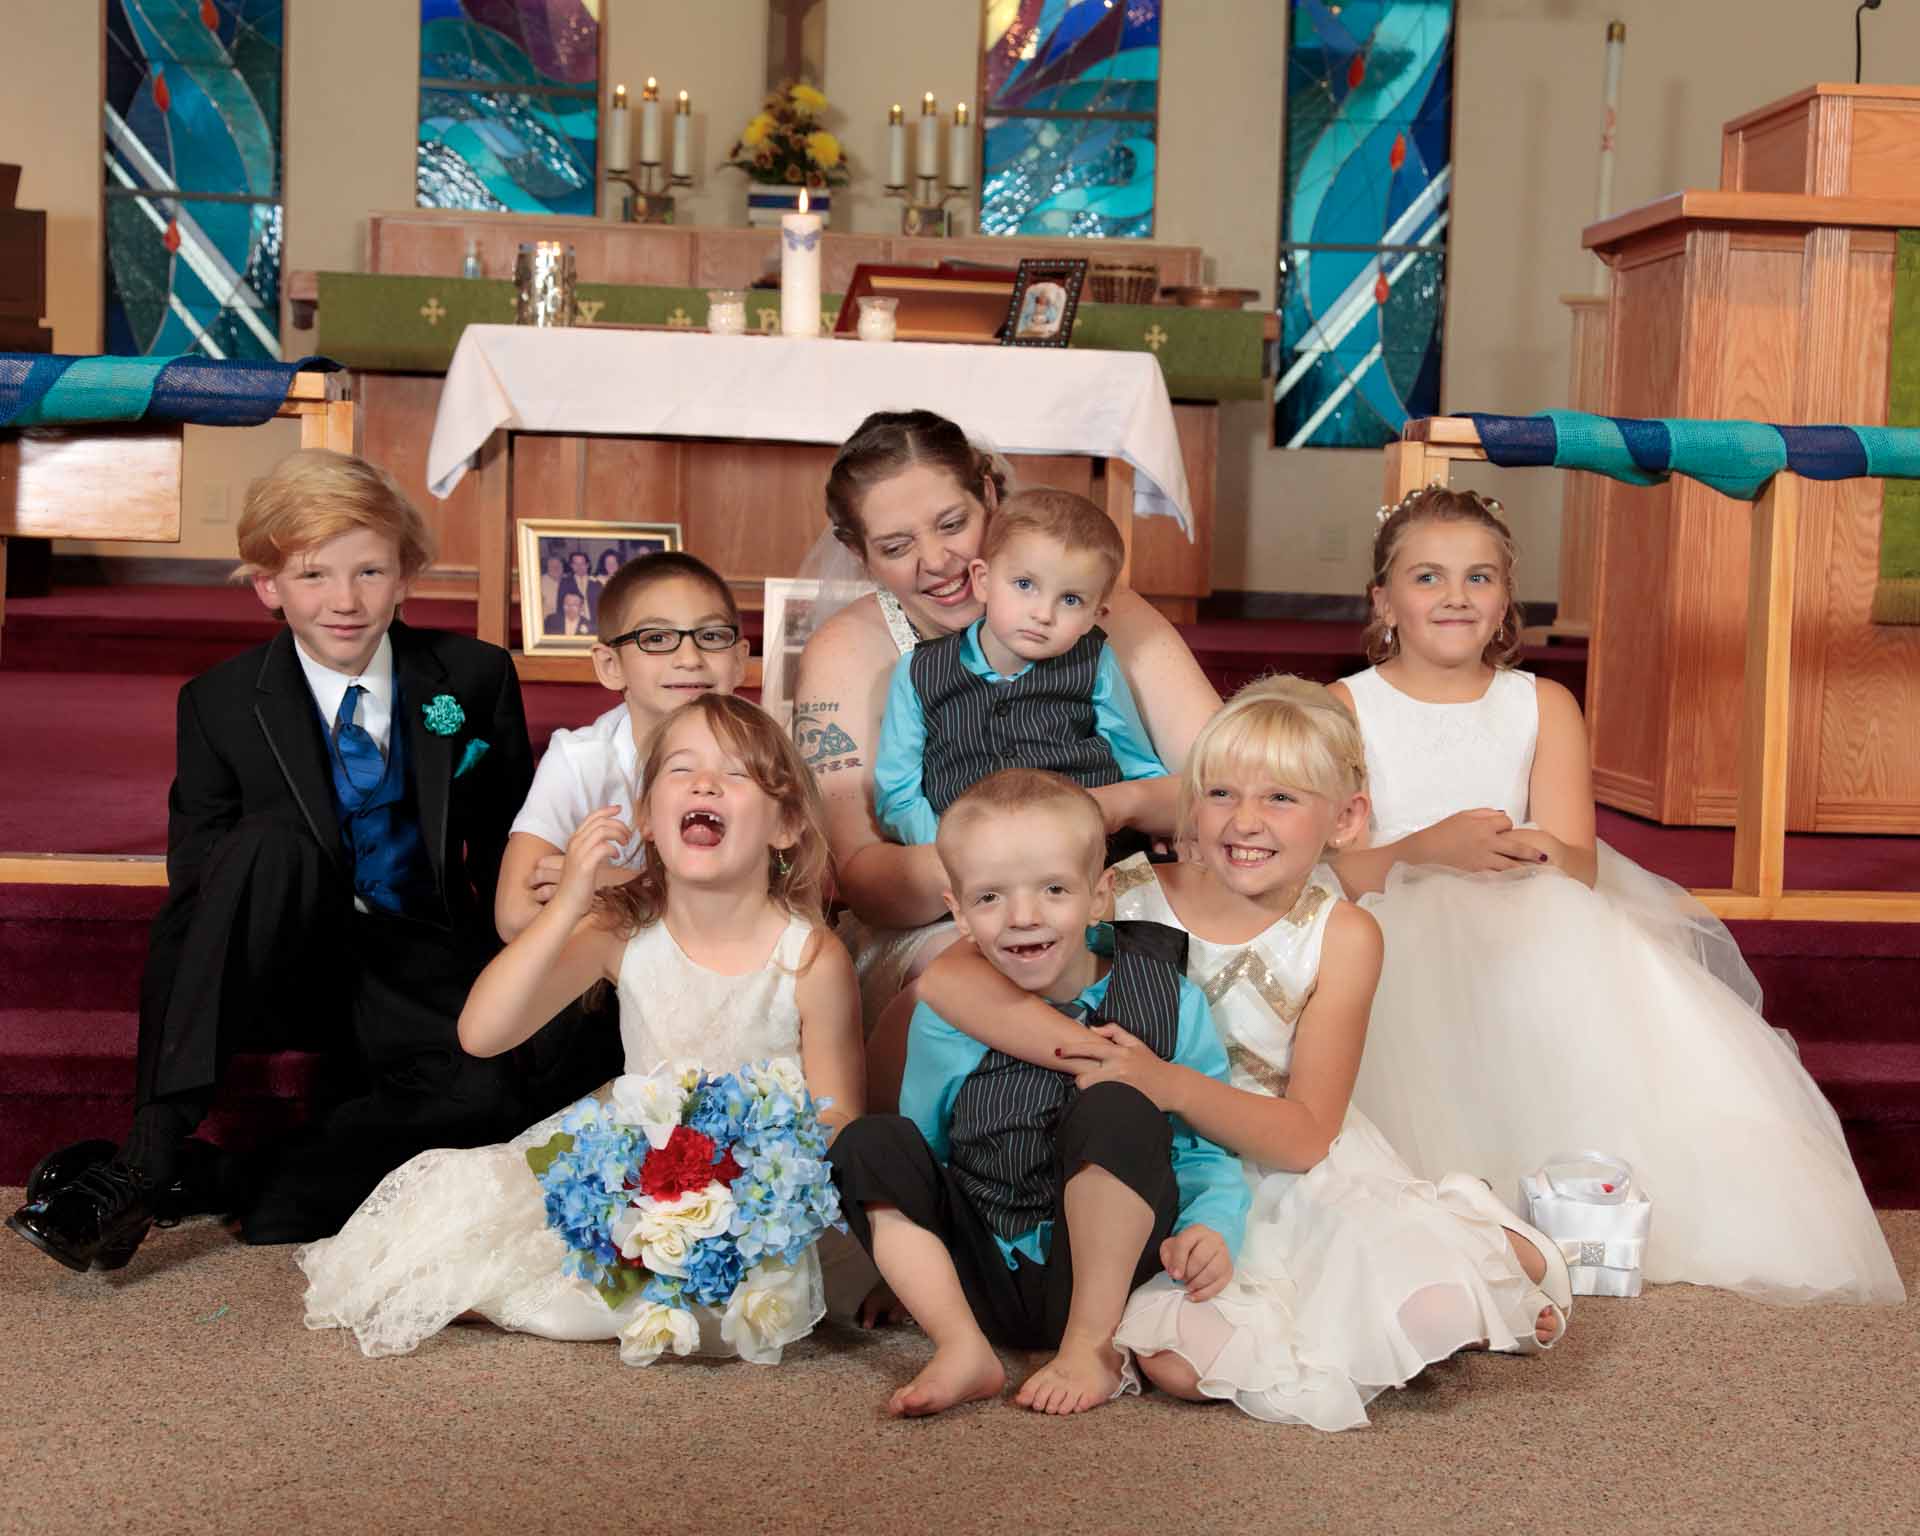 Young bride surrounded with children on her wedding day